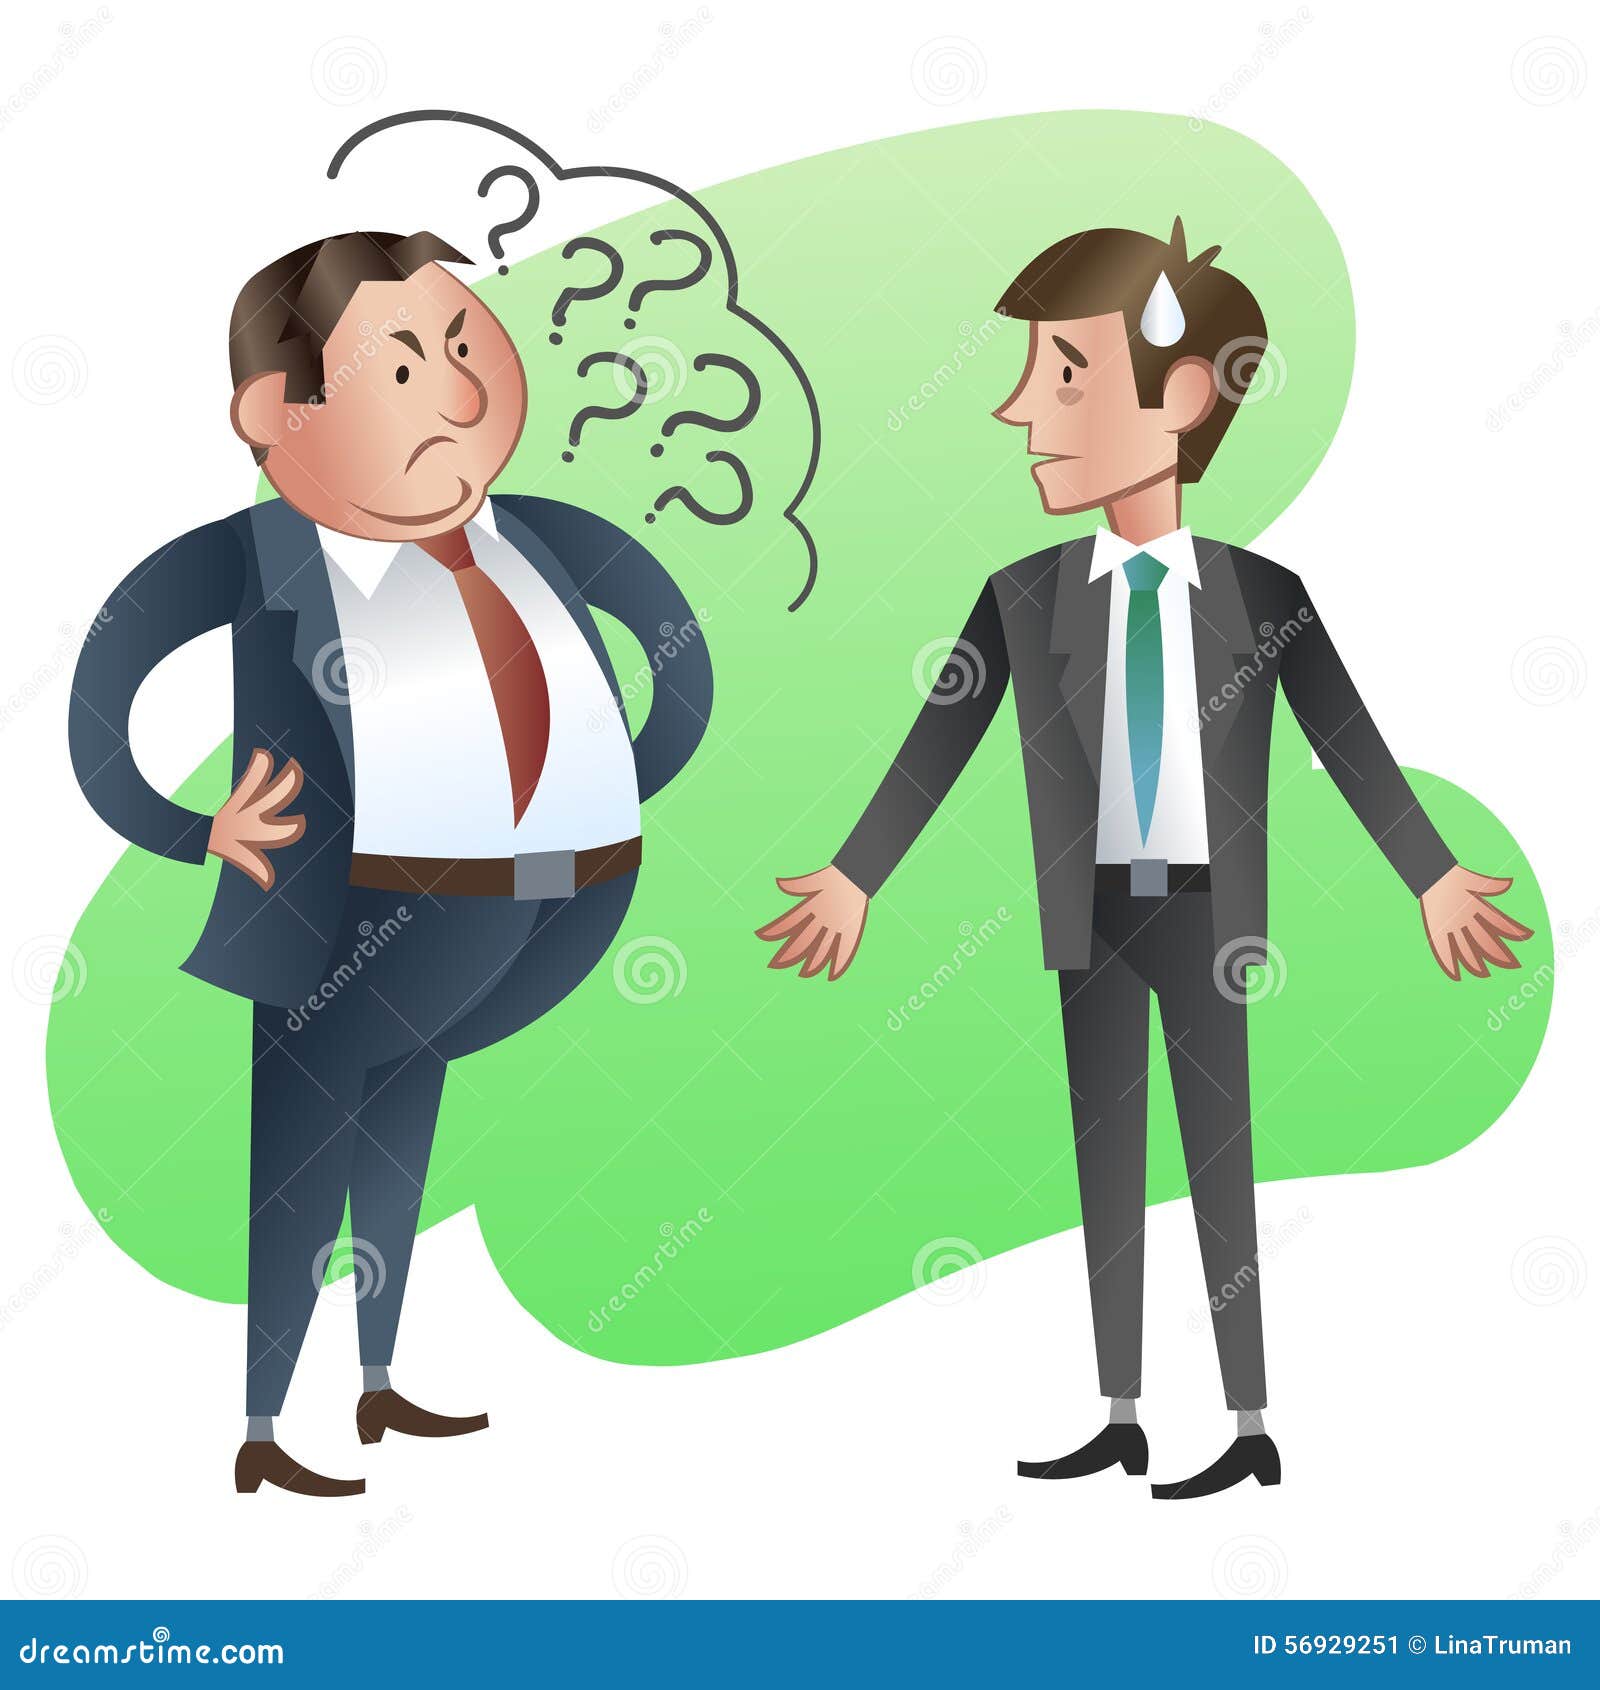 boss or manager asks a subordinate employee.